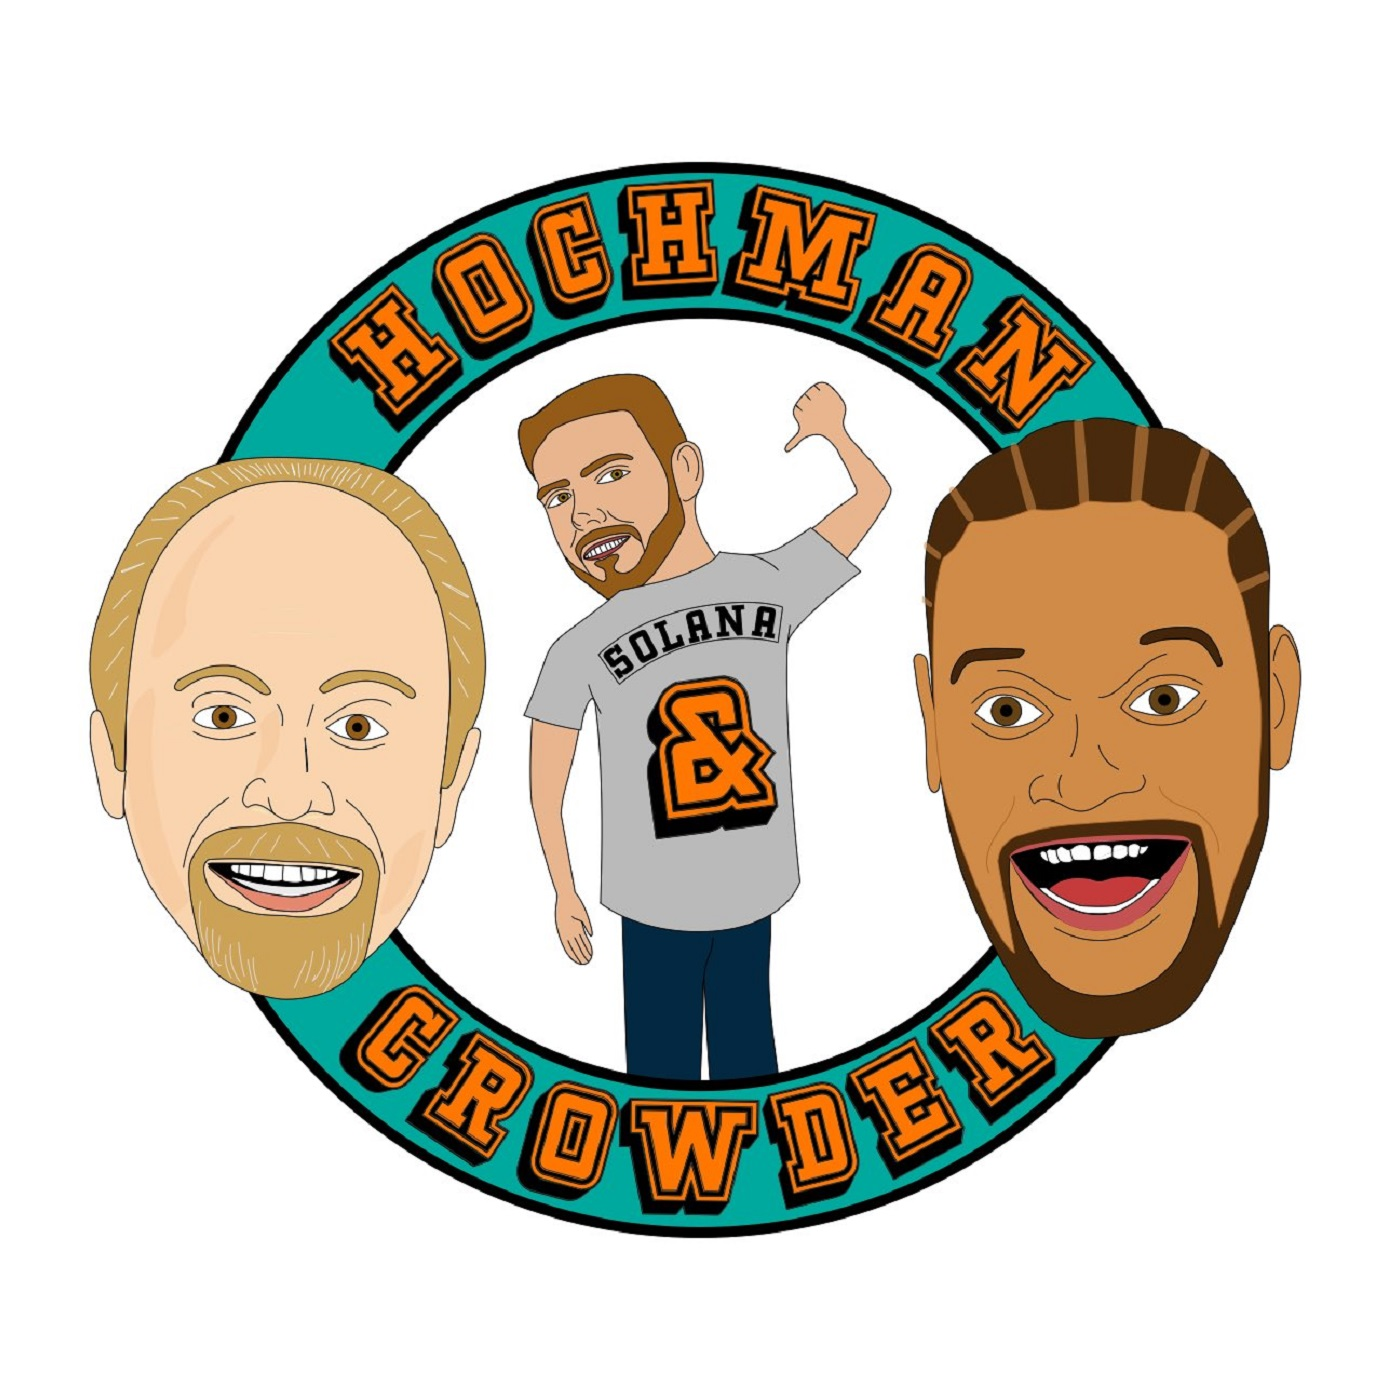 06-19-2019 - Hoch and Crowder Podcast Hour 4